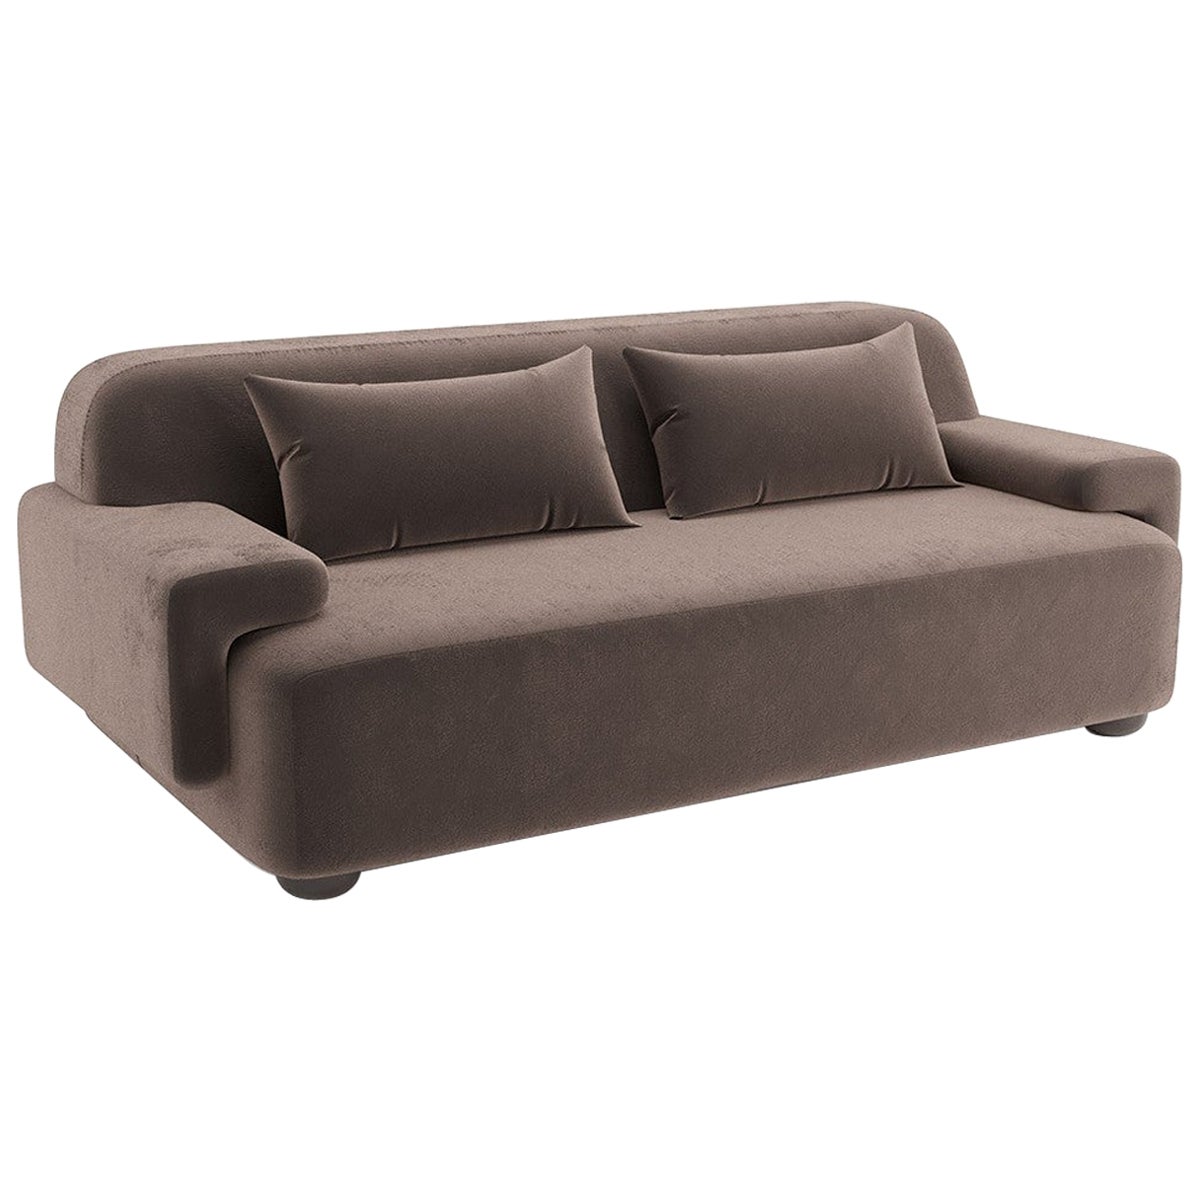 Popus Editions Lena 4-Seater Sofa in Mole Taupe Como Velvet Upholstery For Sale